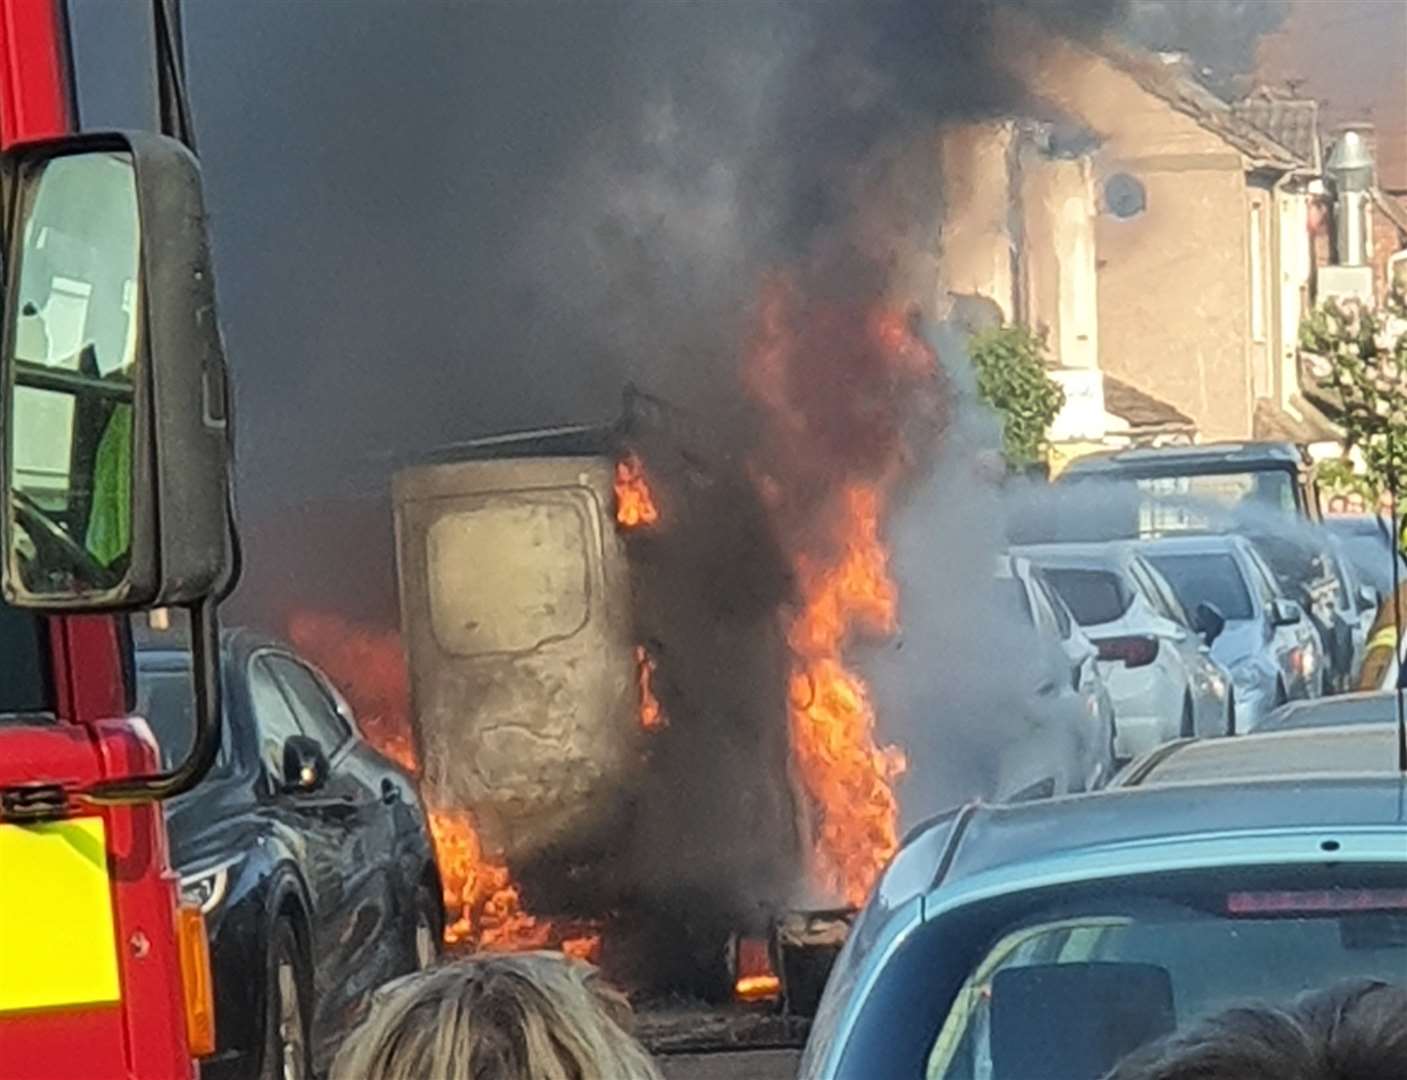 A van parked on Bramley Road in Snodland caught fire. Picture: Johnathan M Donaghy